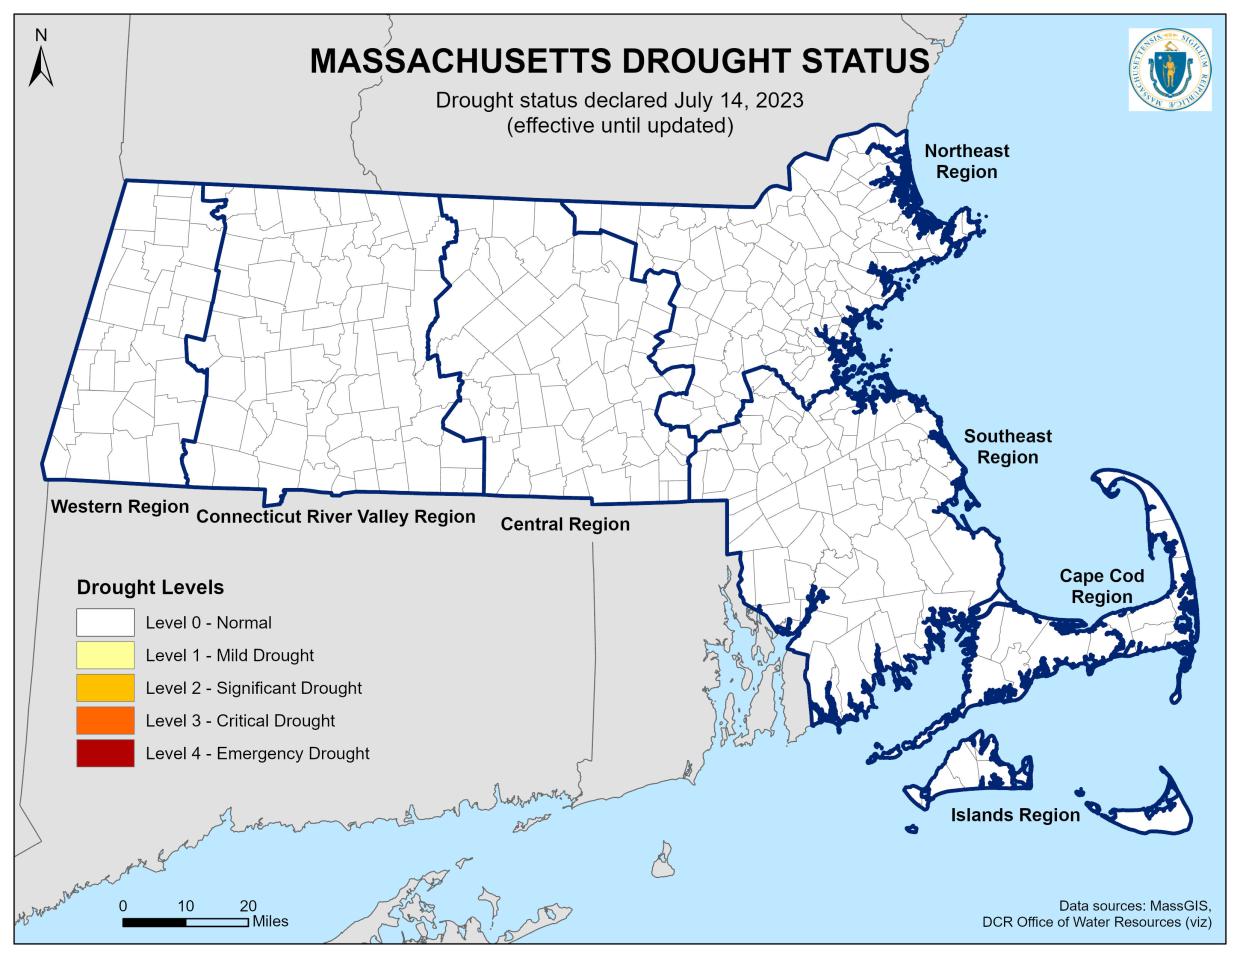 Drought status declared July 14, 2023.(effective until updated)